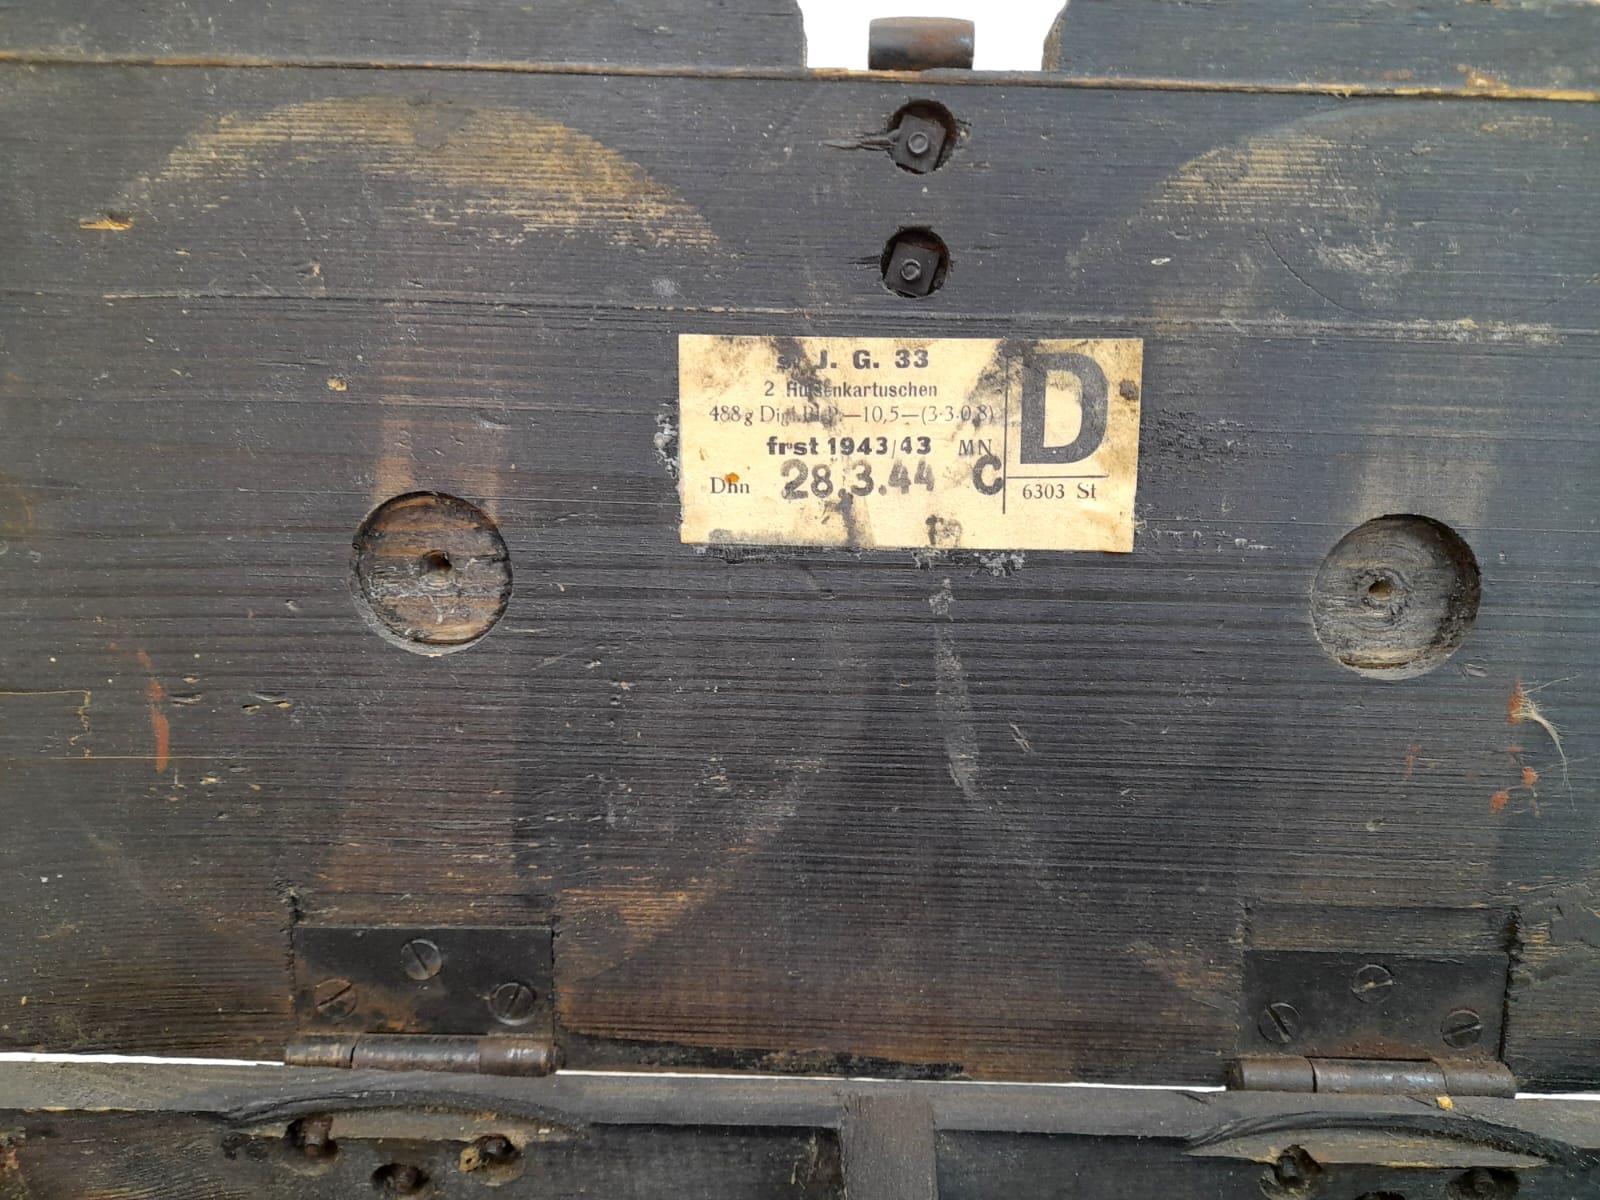 WW2 German 15cm Sig 33 Cartridge Box with original labels, stencils, and internals. - Image 15 of 15